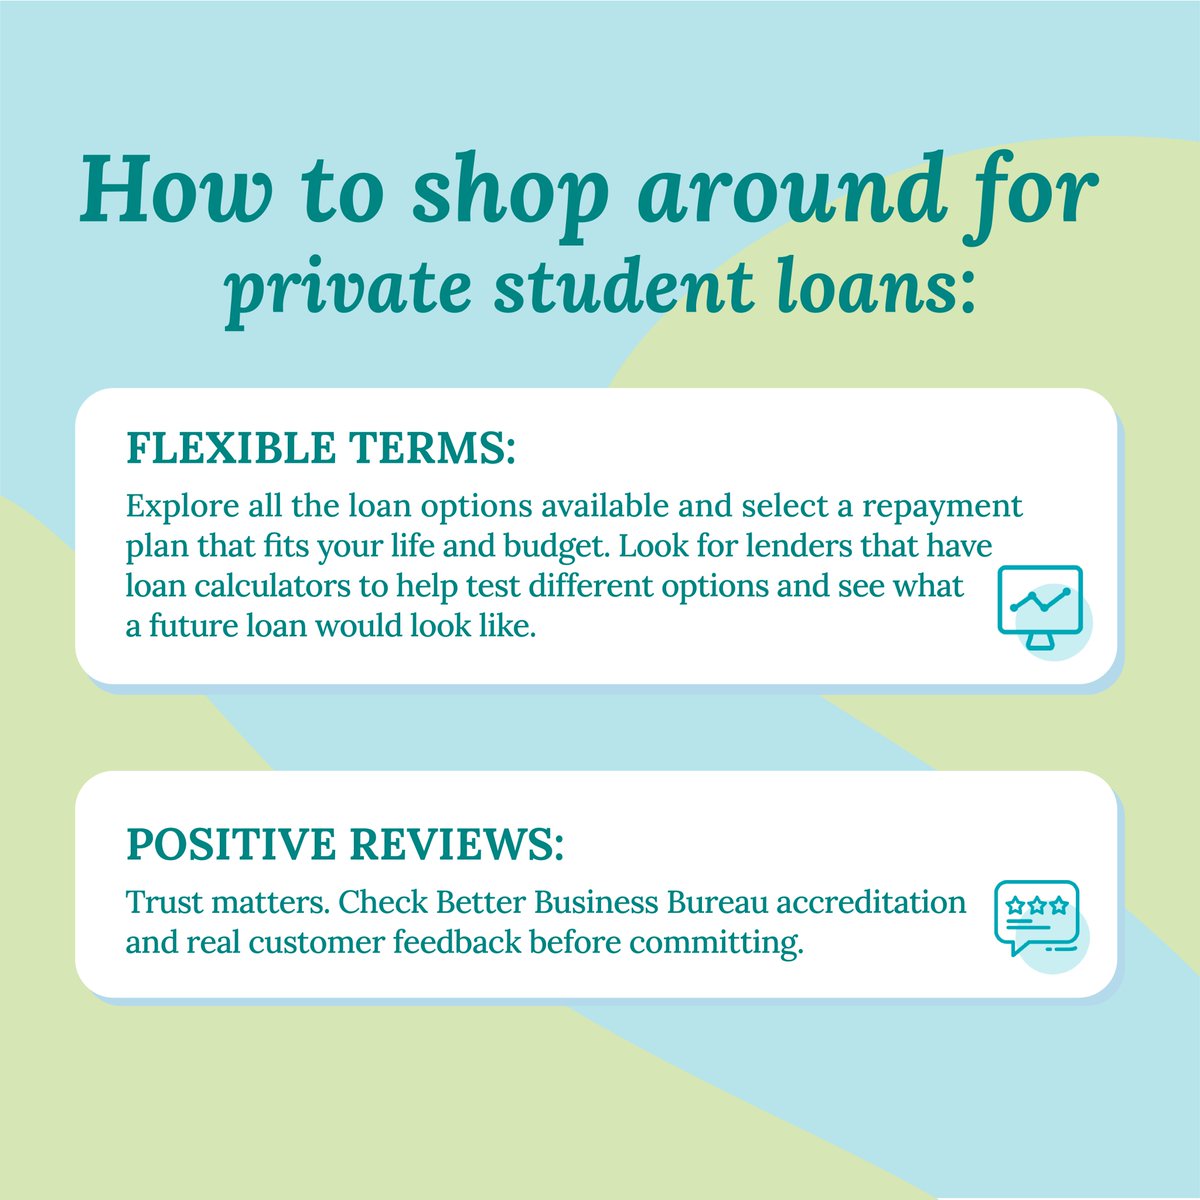 Navigate the loan landscape like a pro! ✨When scholarships, financial aid and federal student loans fall short, use these shopping tips to explore private student loan options. #studentloans collegeave.blog/shop-student-l…